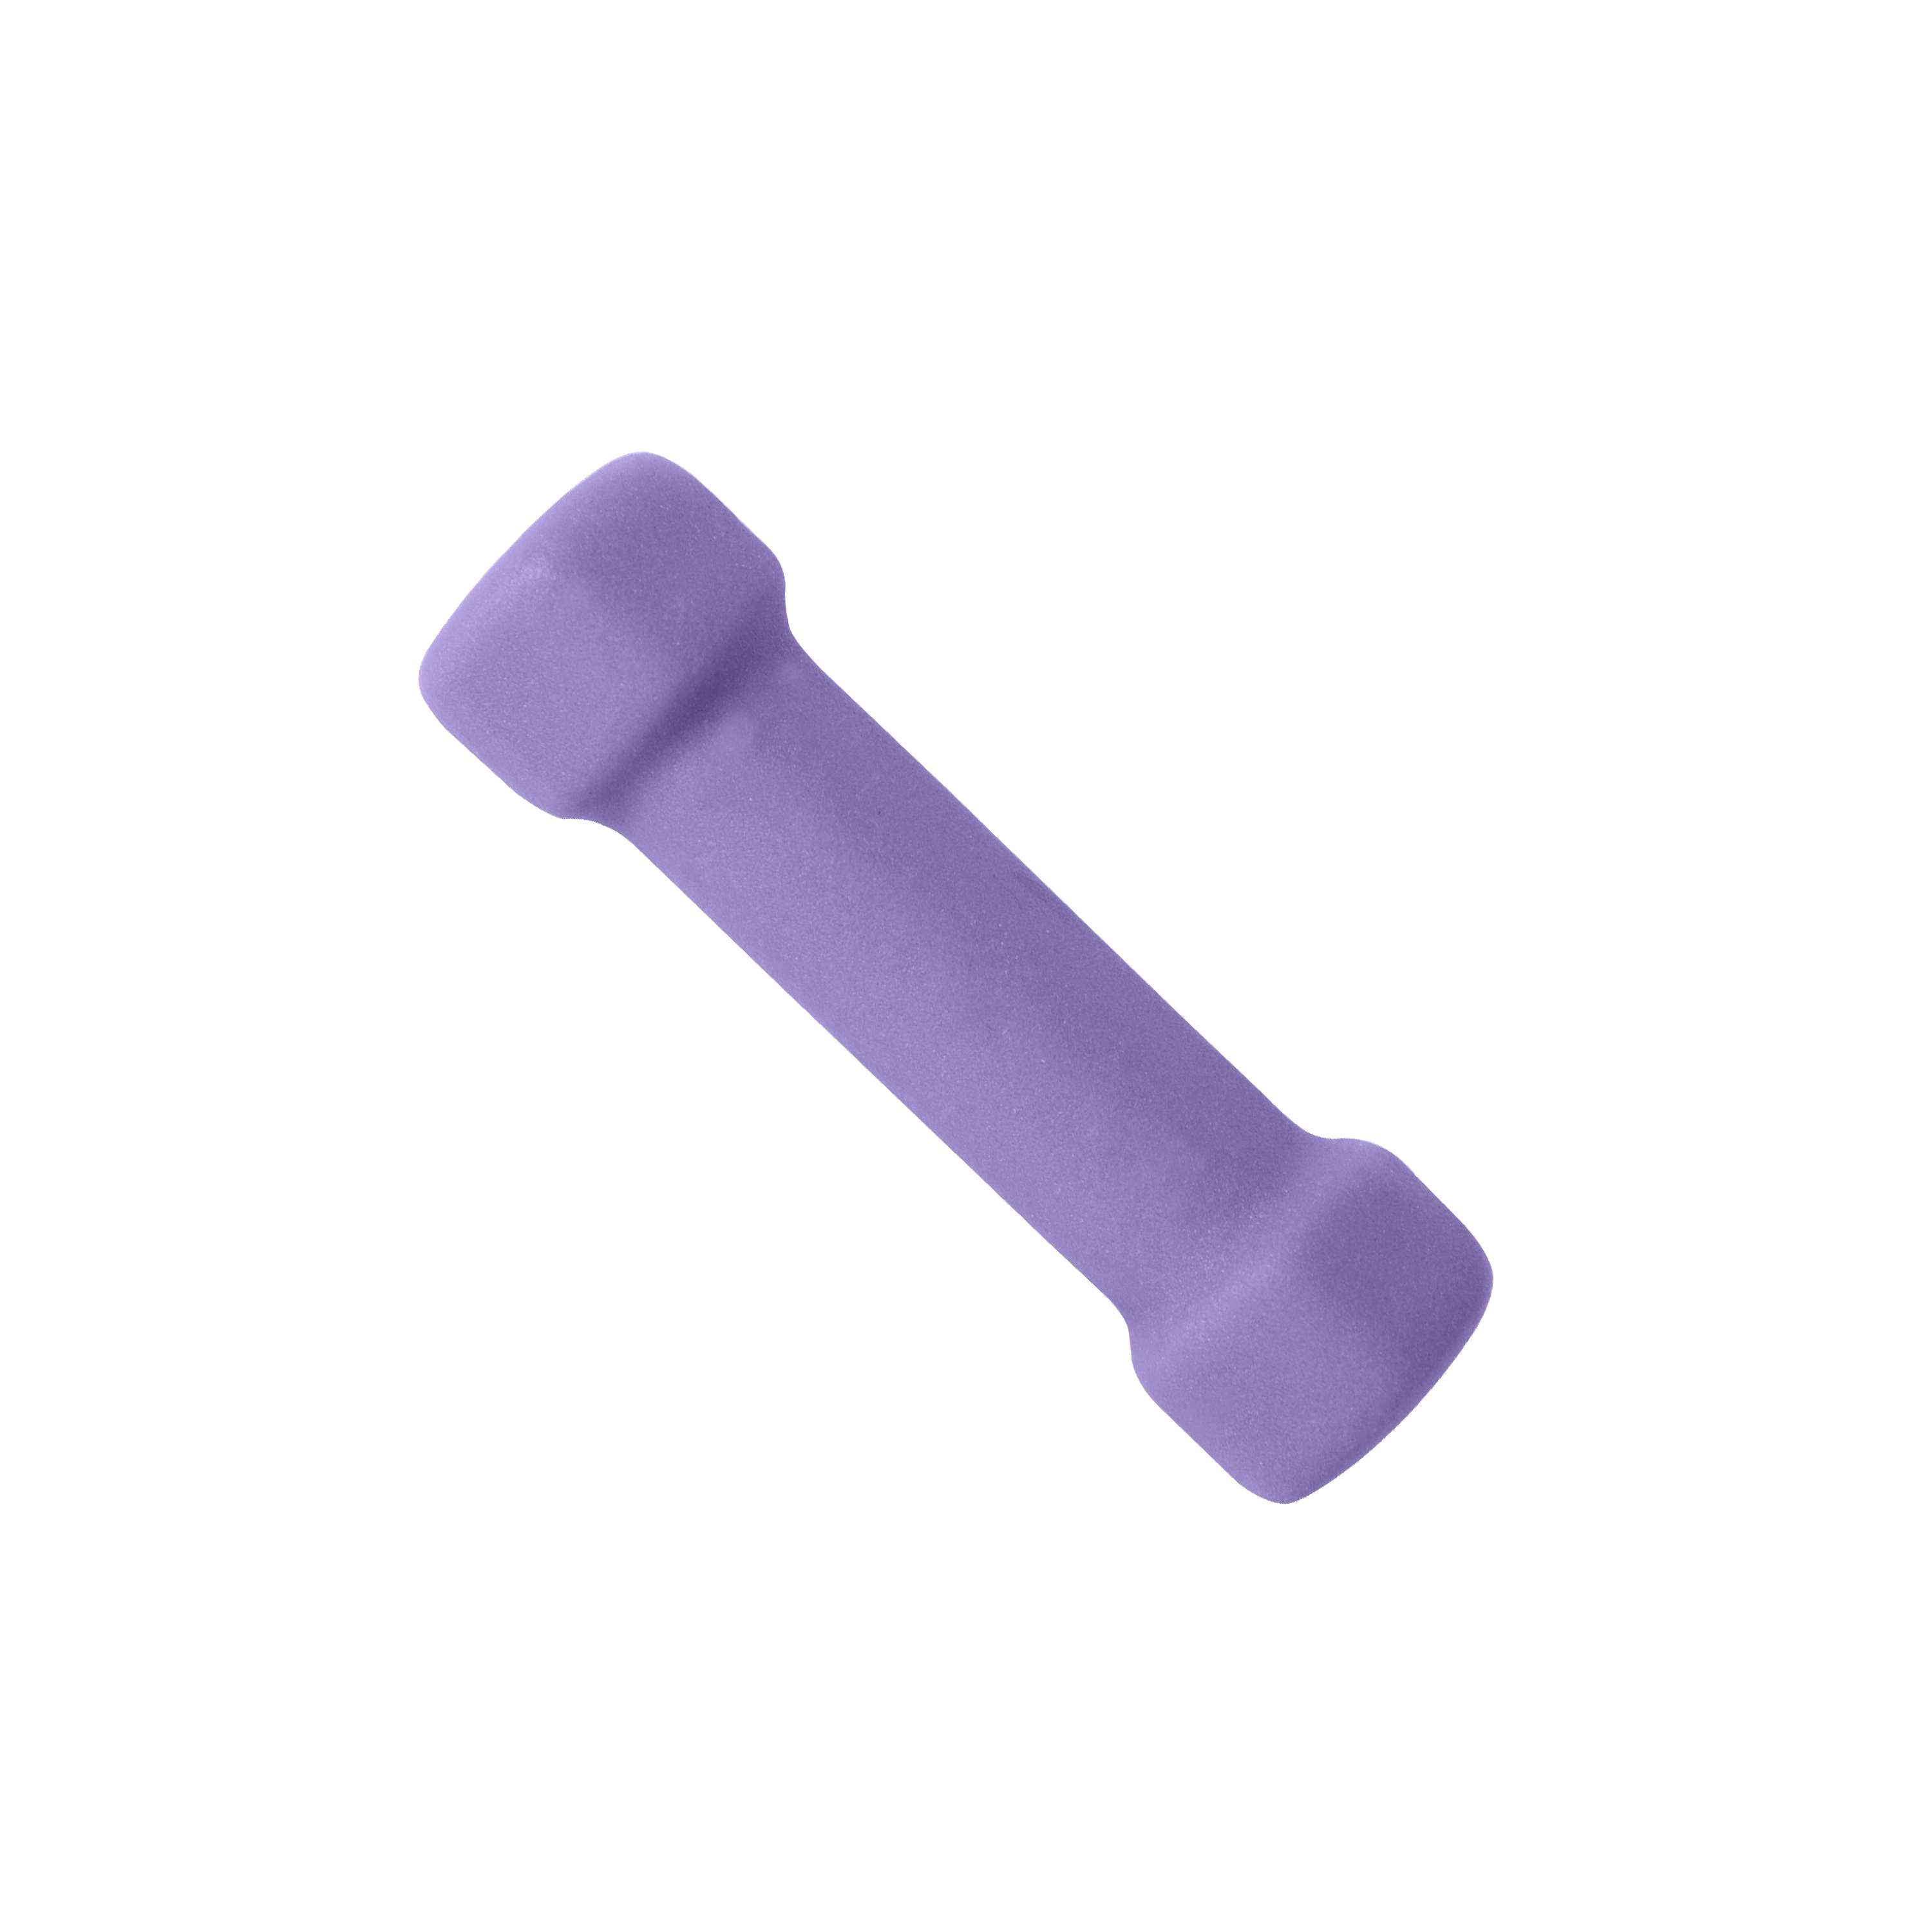 CAP Barbell Neoprene Dumbbell (Available in 1 Lb. - 9 Lbs.), Single - image 2 of 5